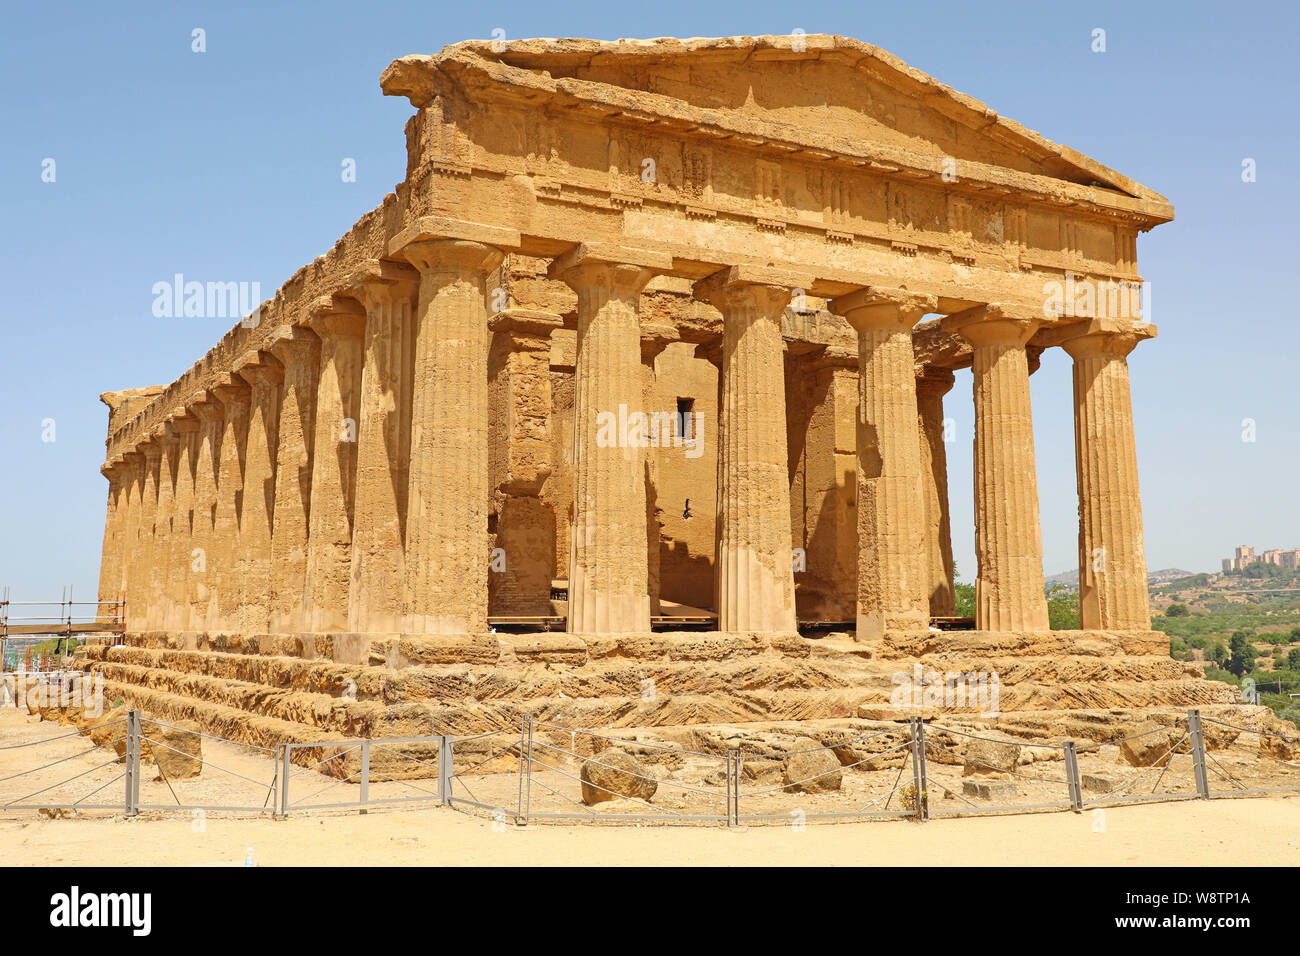 Temple of Concordia, Valley of the Temples, Agrigento, Sicily, Italy Stock Photo